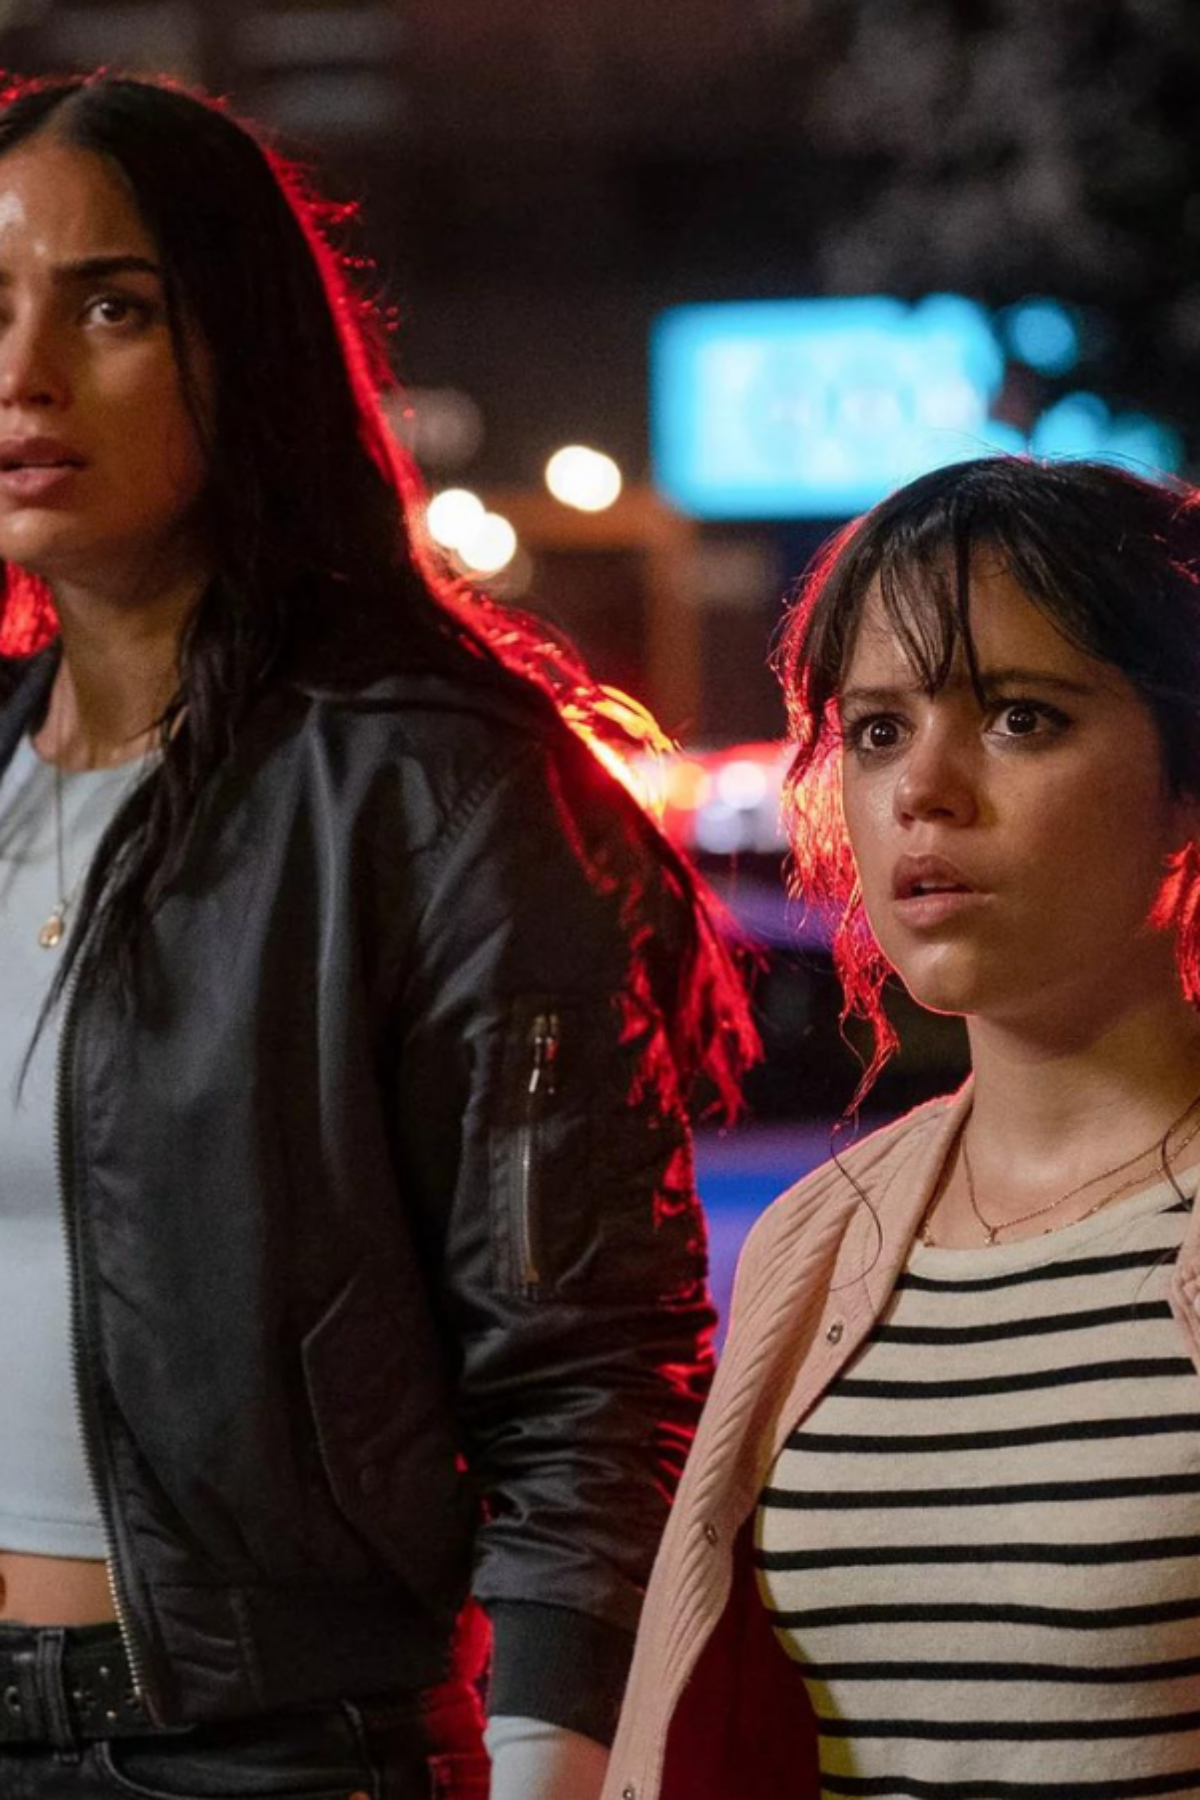 Melissa Barrera and Jenna Ortega in Scream 6 from Paramount Pictures